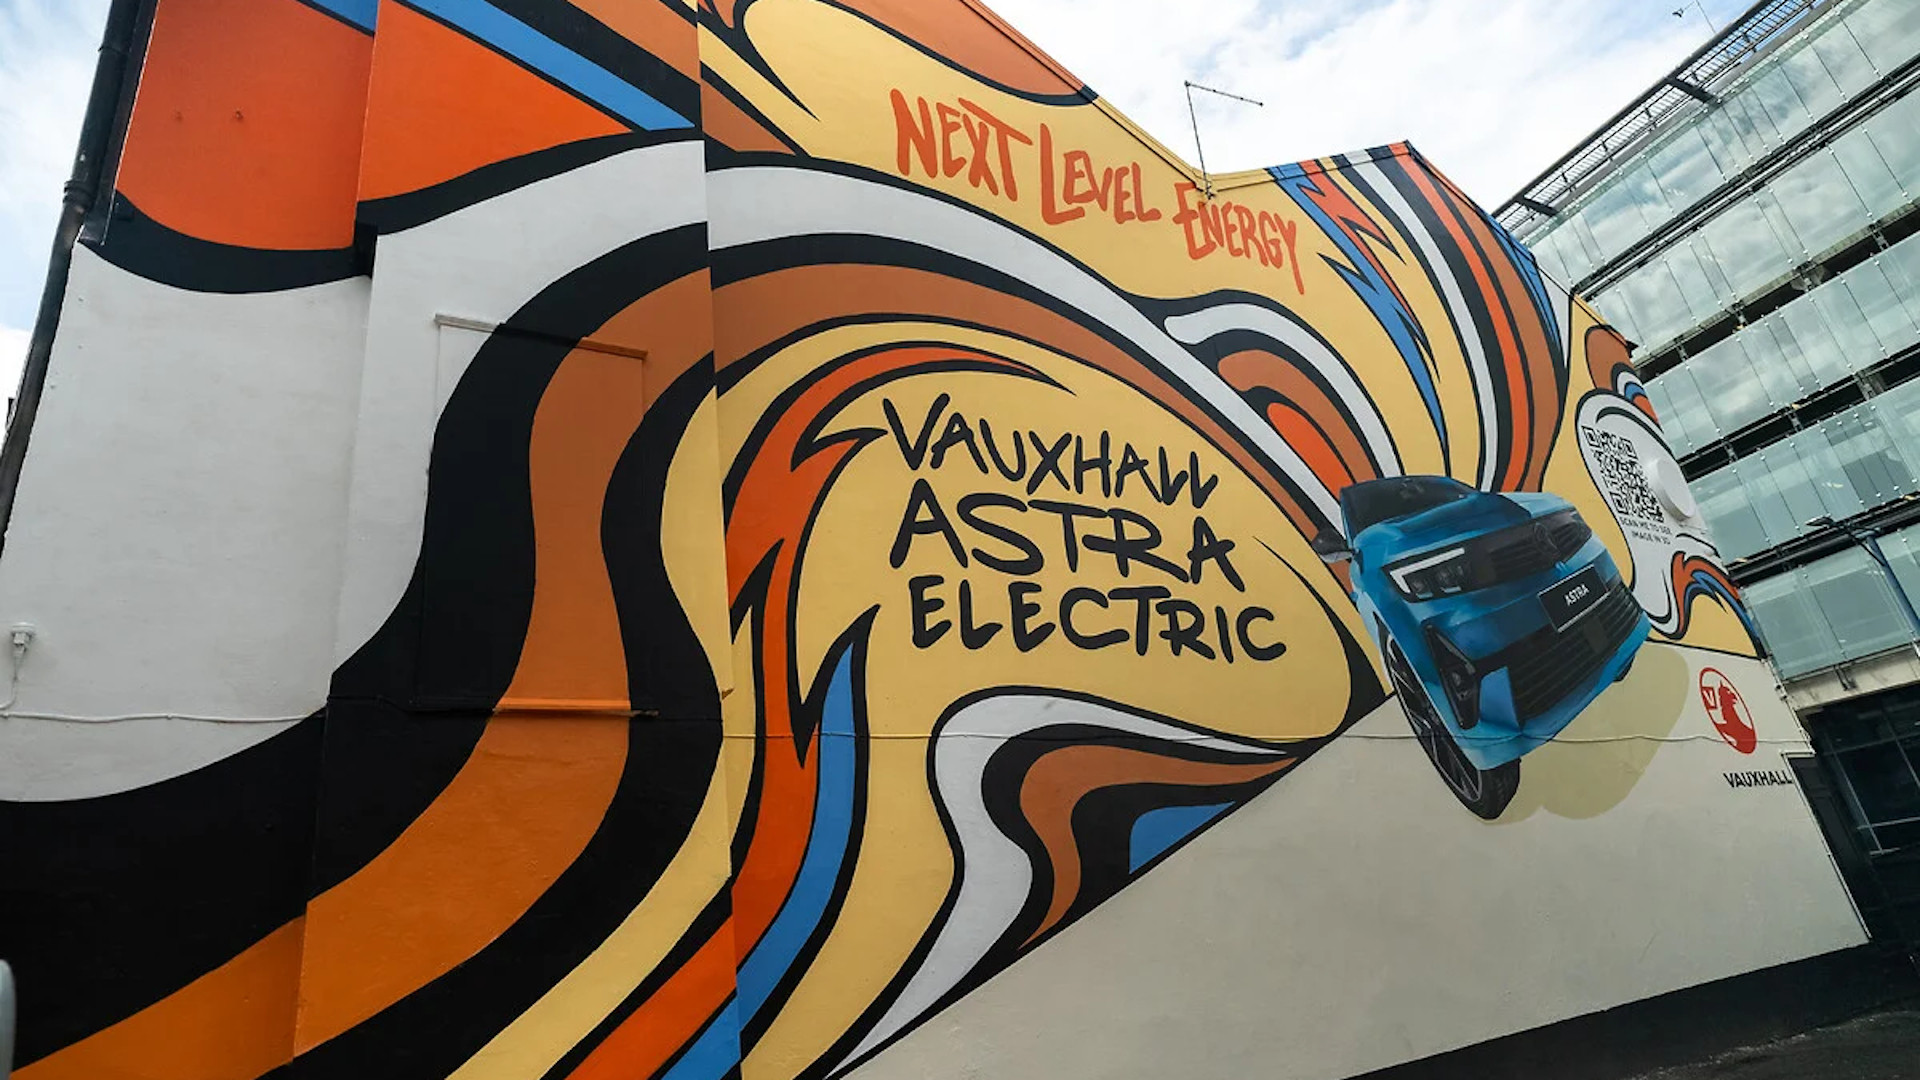 London and Manchester murals celebrate the launch of  Vauxhall Astra Electric